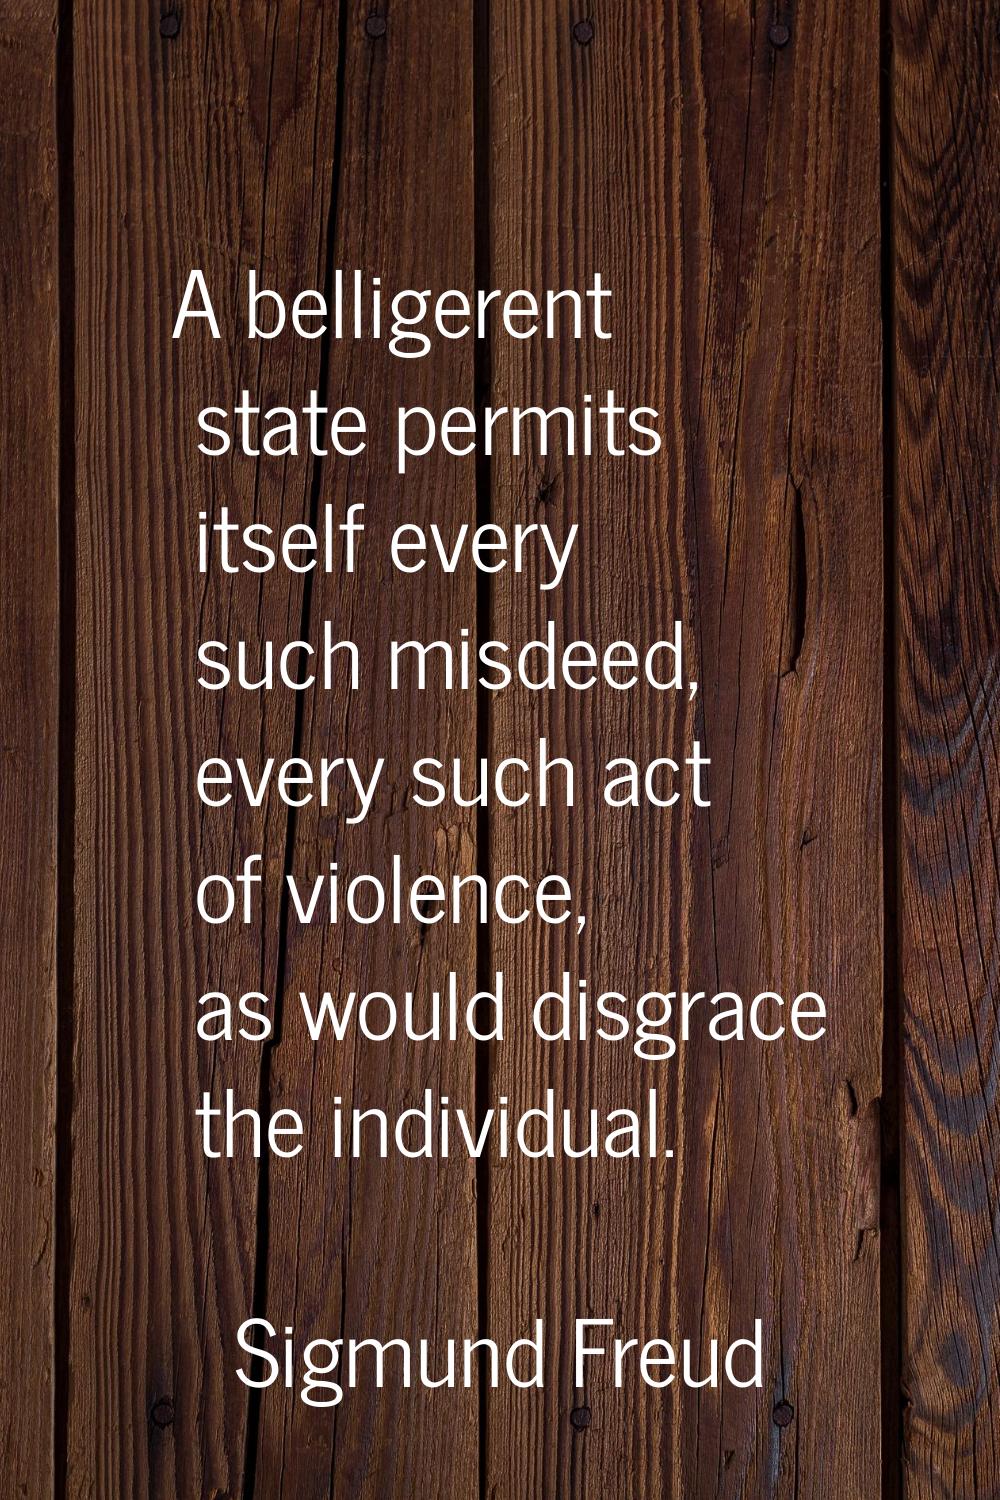 A belligerent state permits itself every such misdeed, every such act of violence, as would disgrac